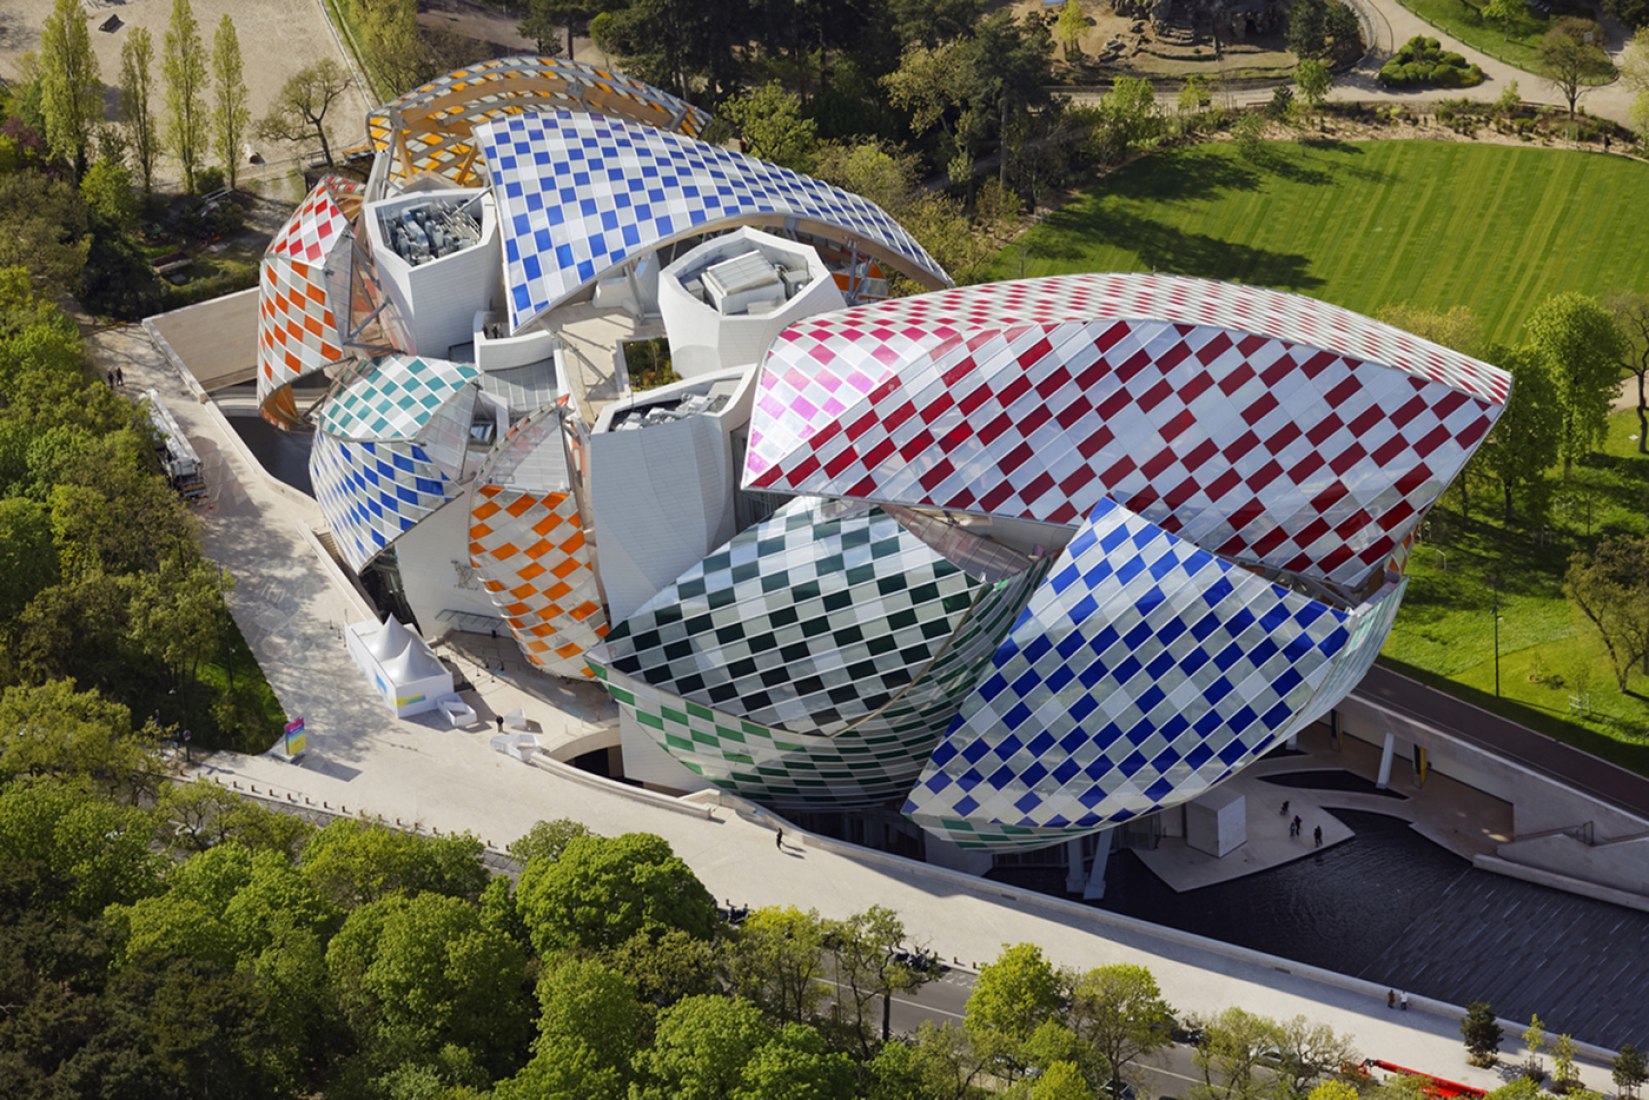 A Daniel Buren's colorful intervention at the Fondation Louis Vuitton, The  Strength of Architecture